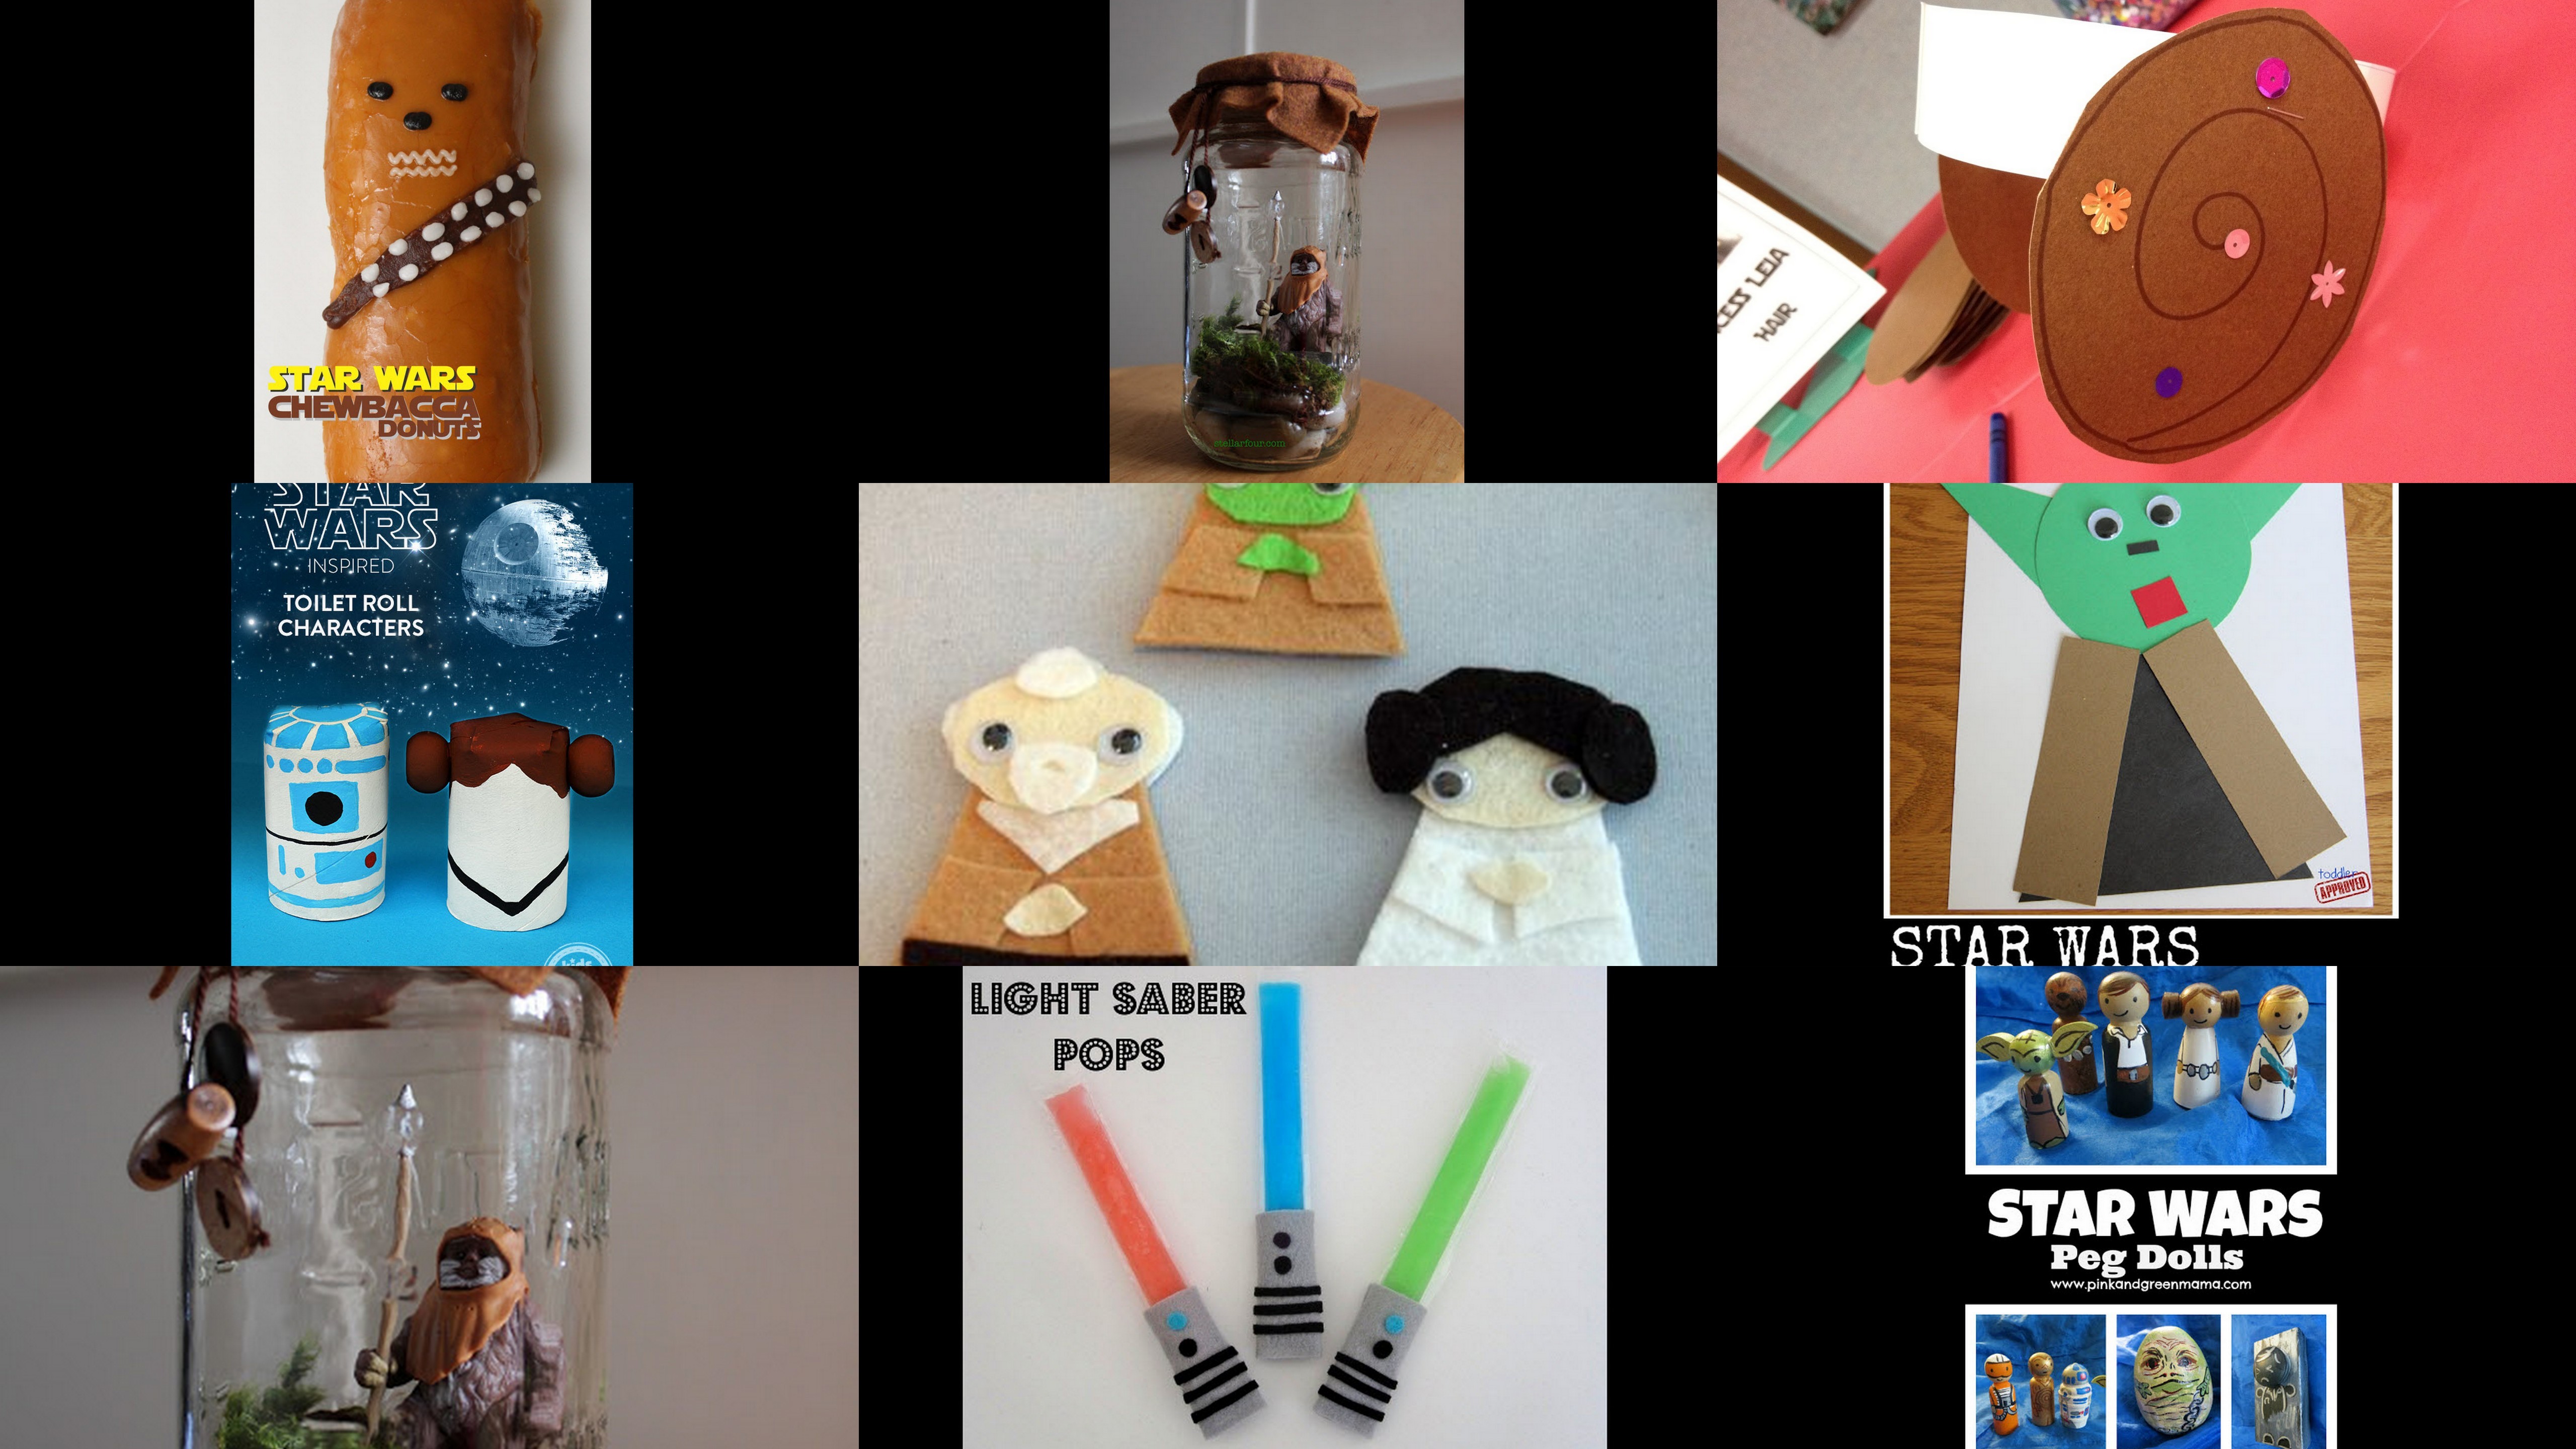 Jedi-Approved} Star Wars Arts and Crafts